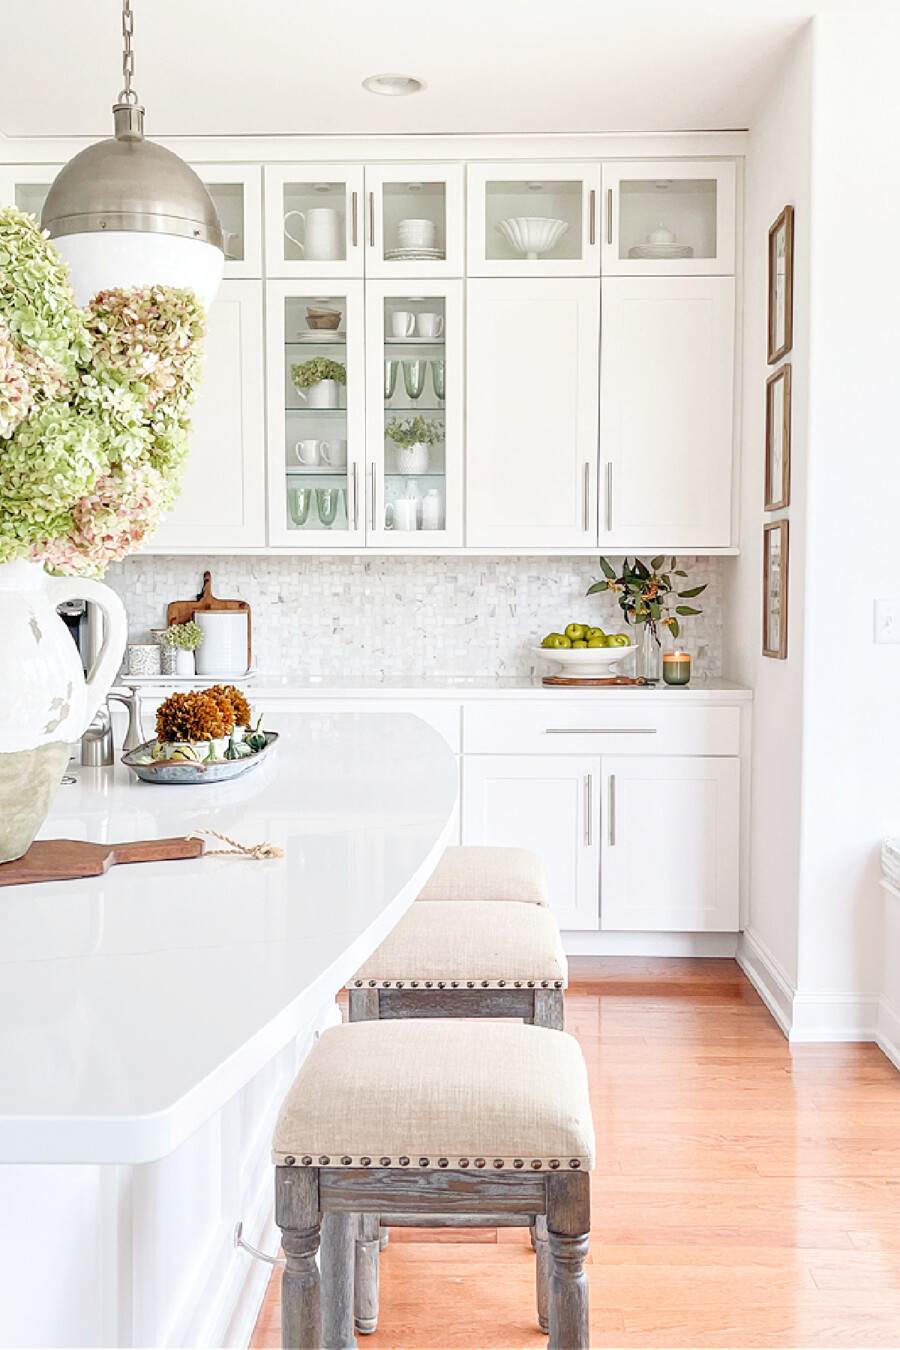 EARLY FALL KITCHEN DECOR AND TOUR